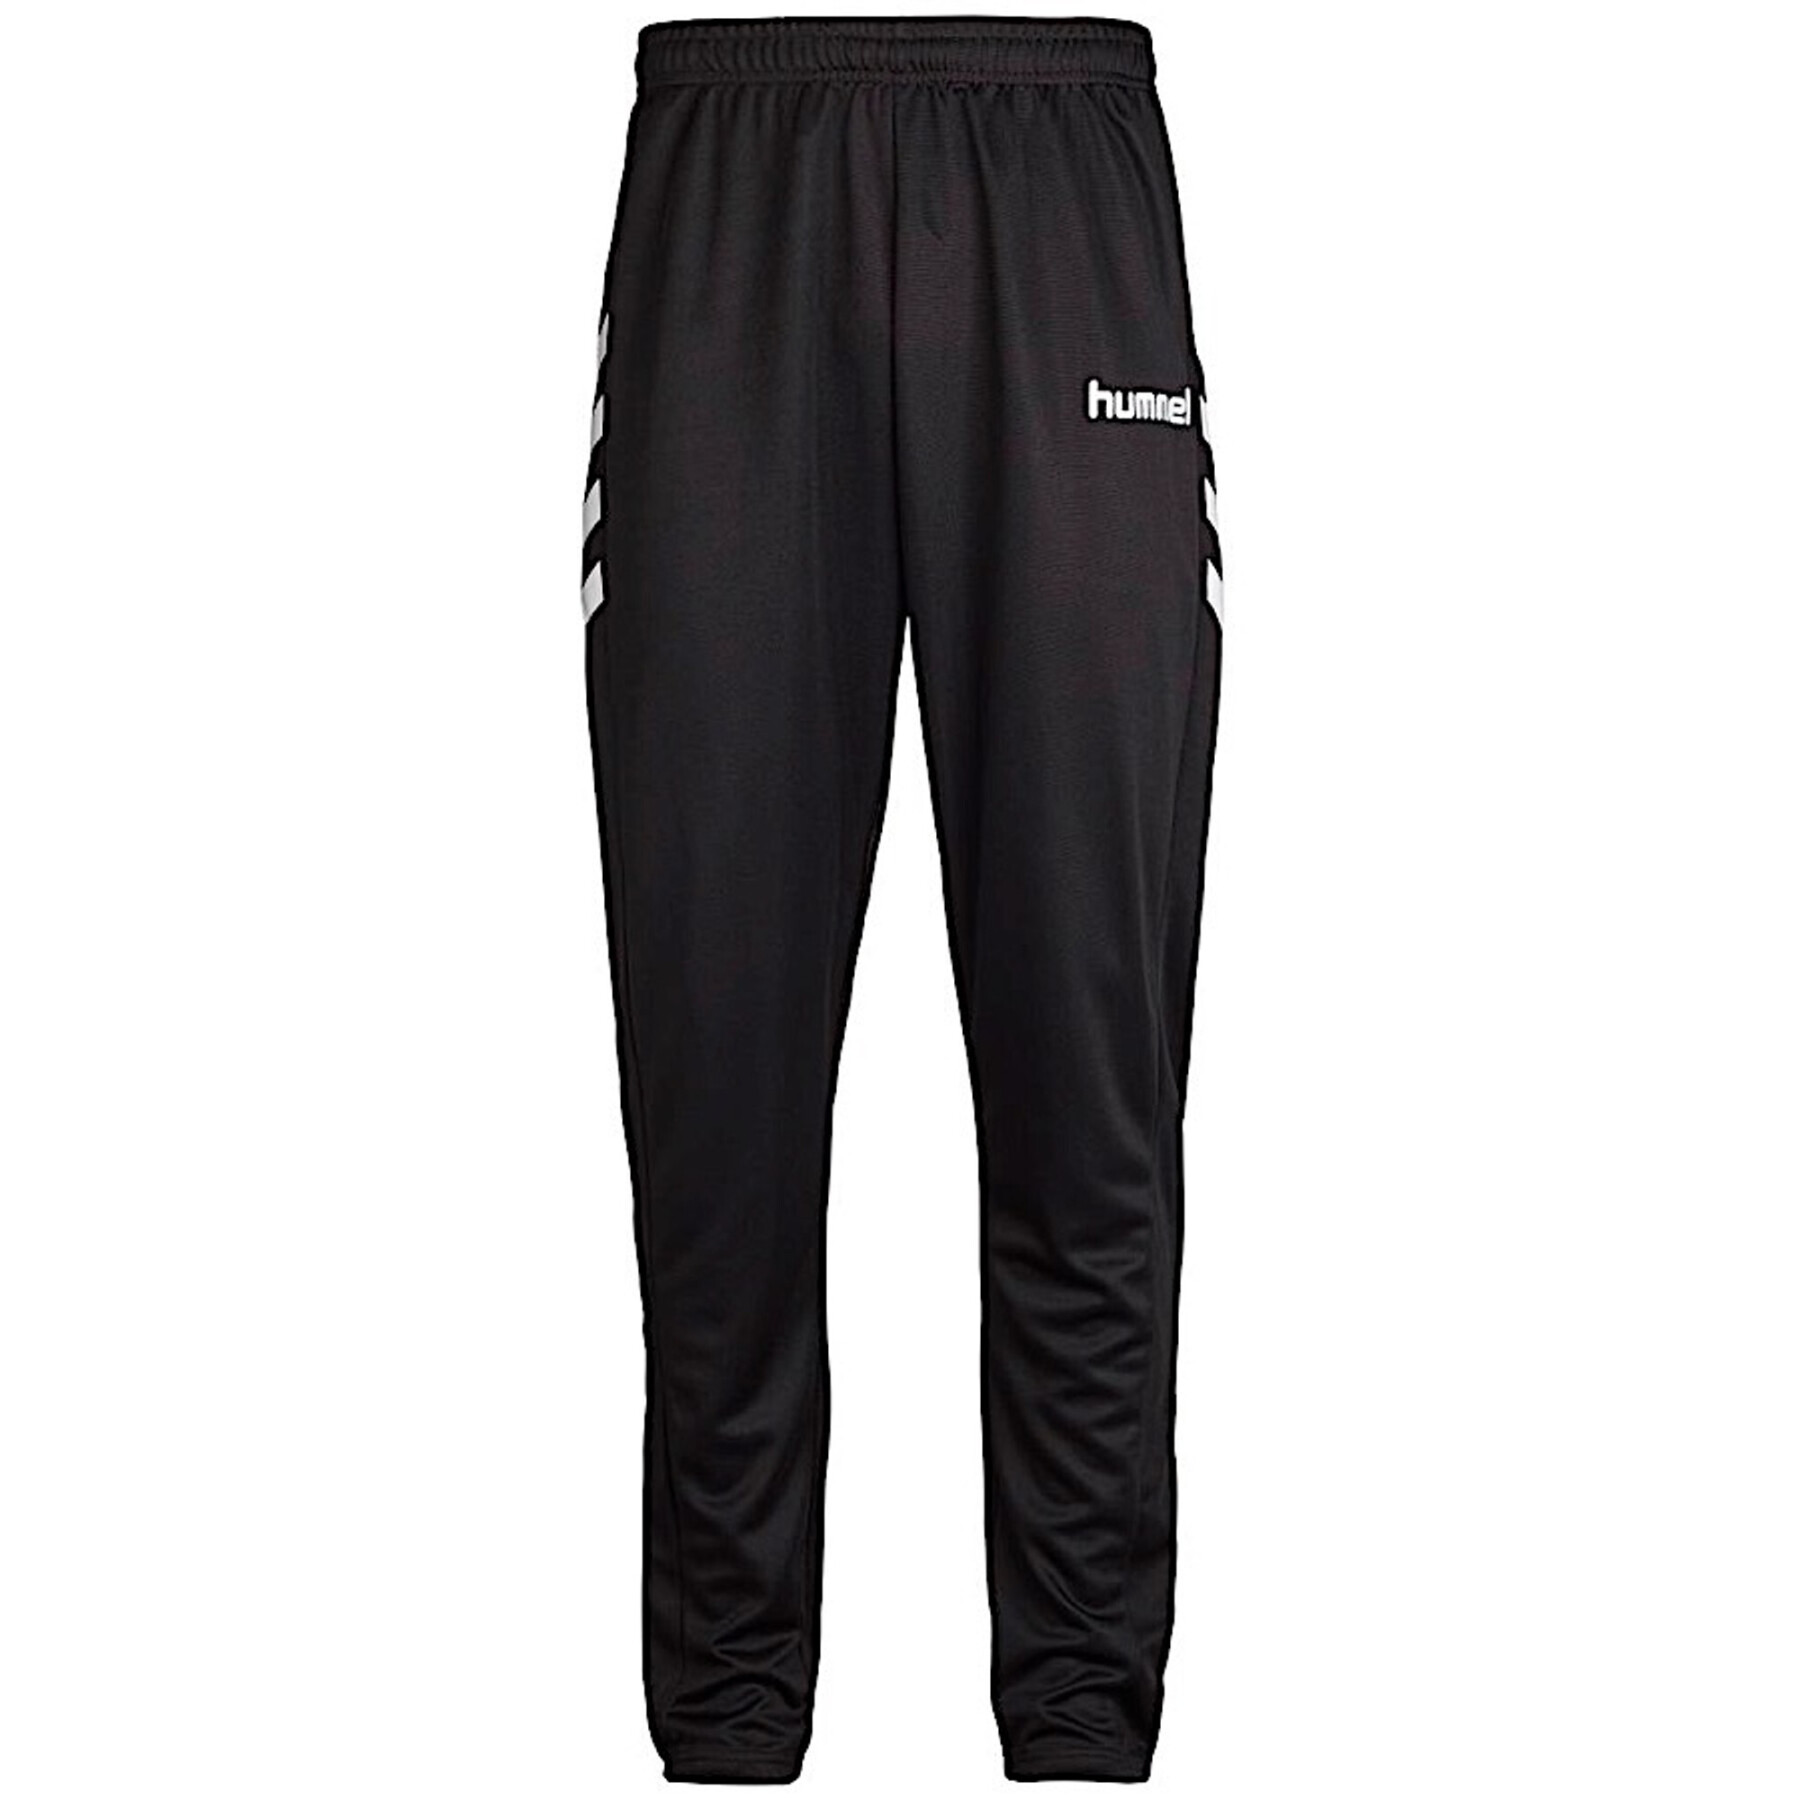 Children's trousers Hummel hmlCORE Poly